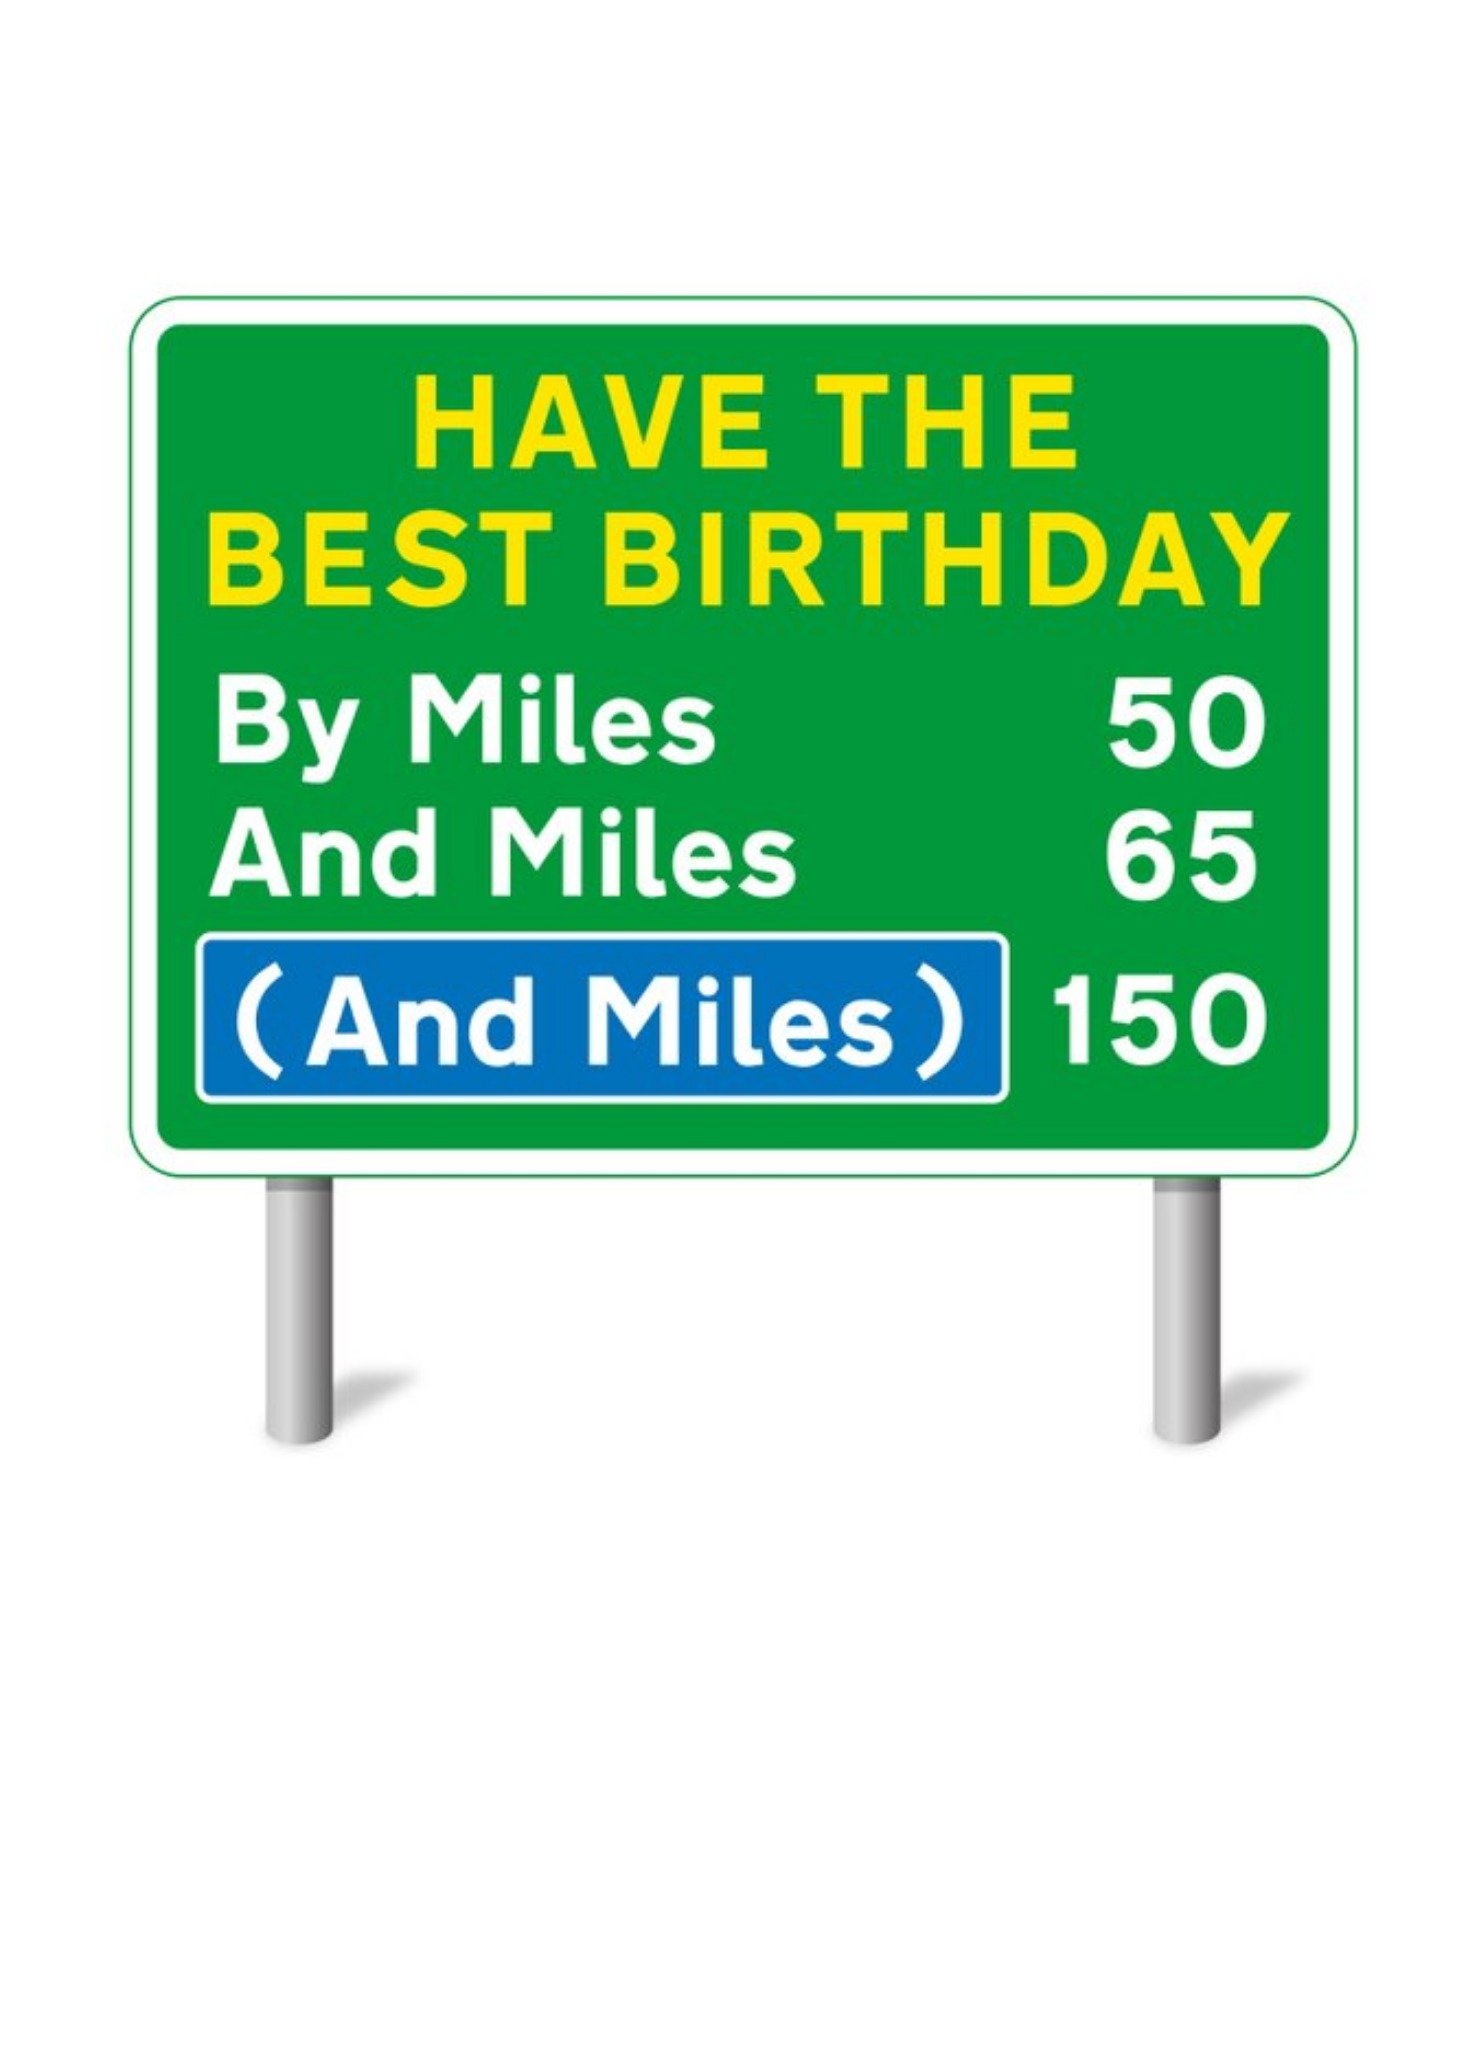 Moonpig Graphic Illustration Of A Road Sign Funny Pun Birthday Card Ecard